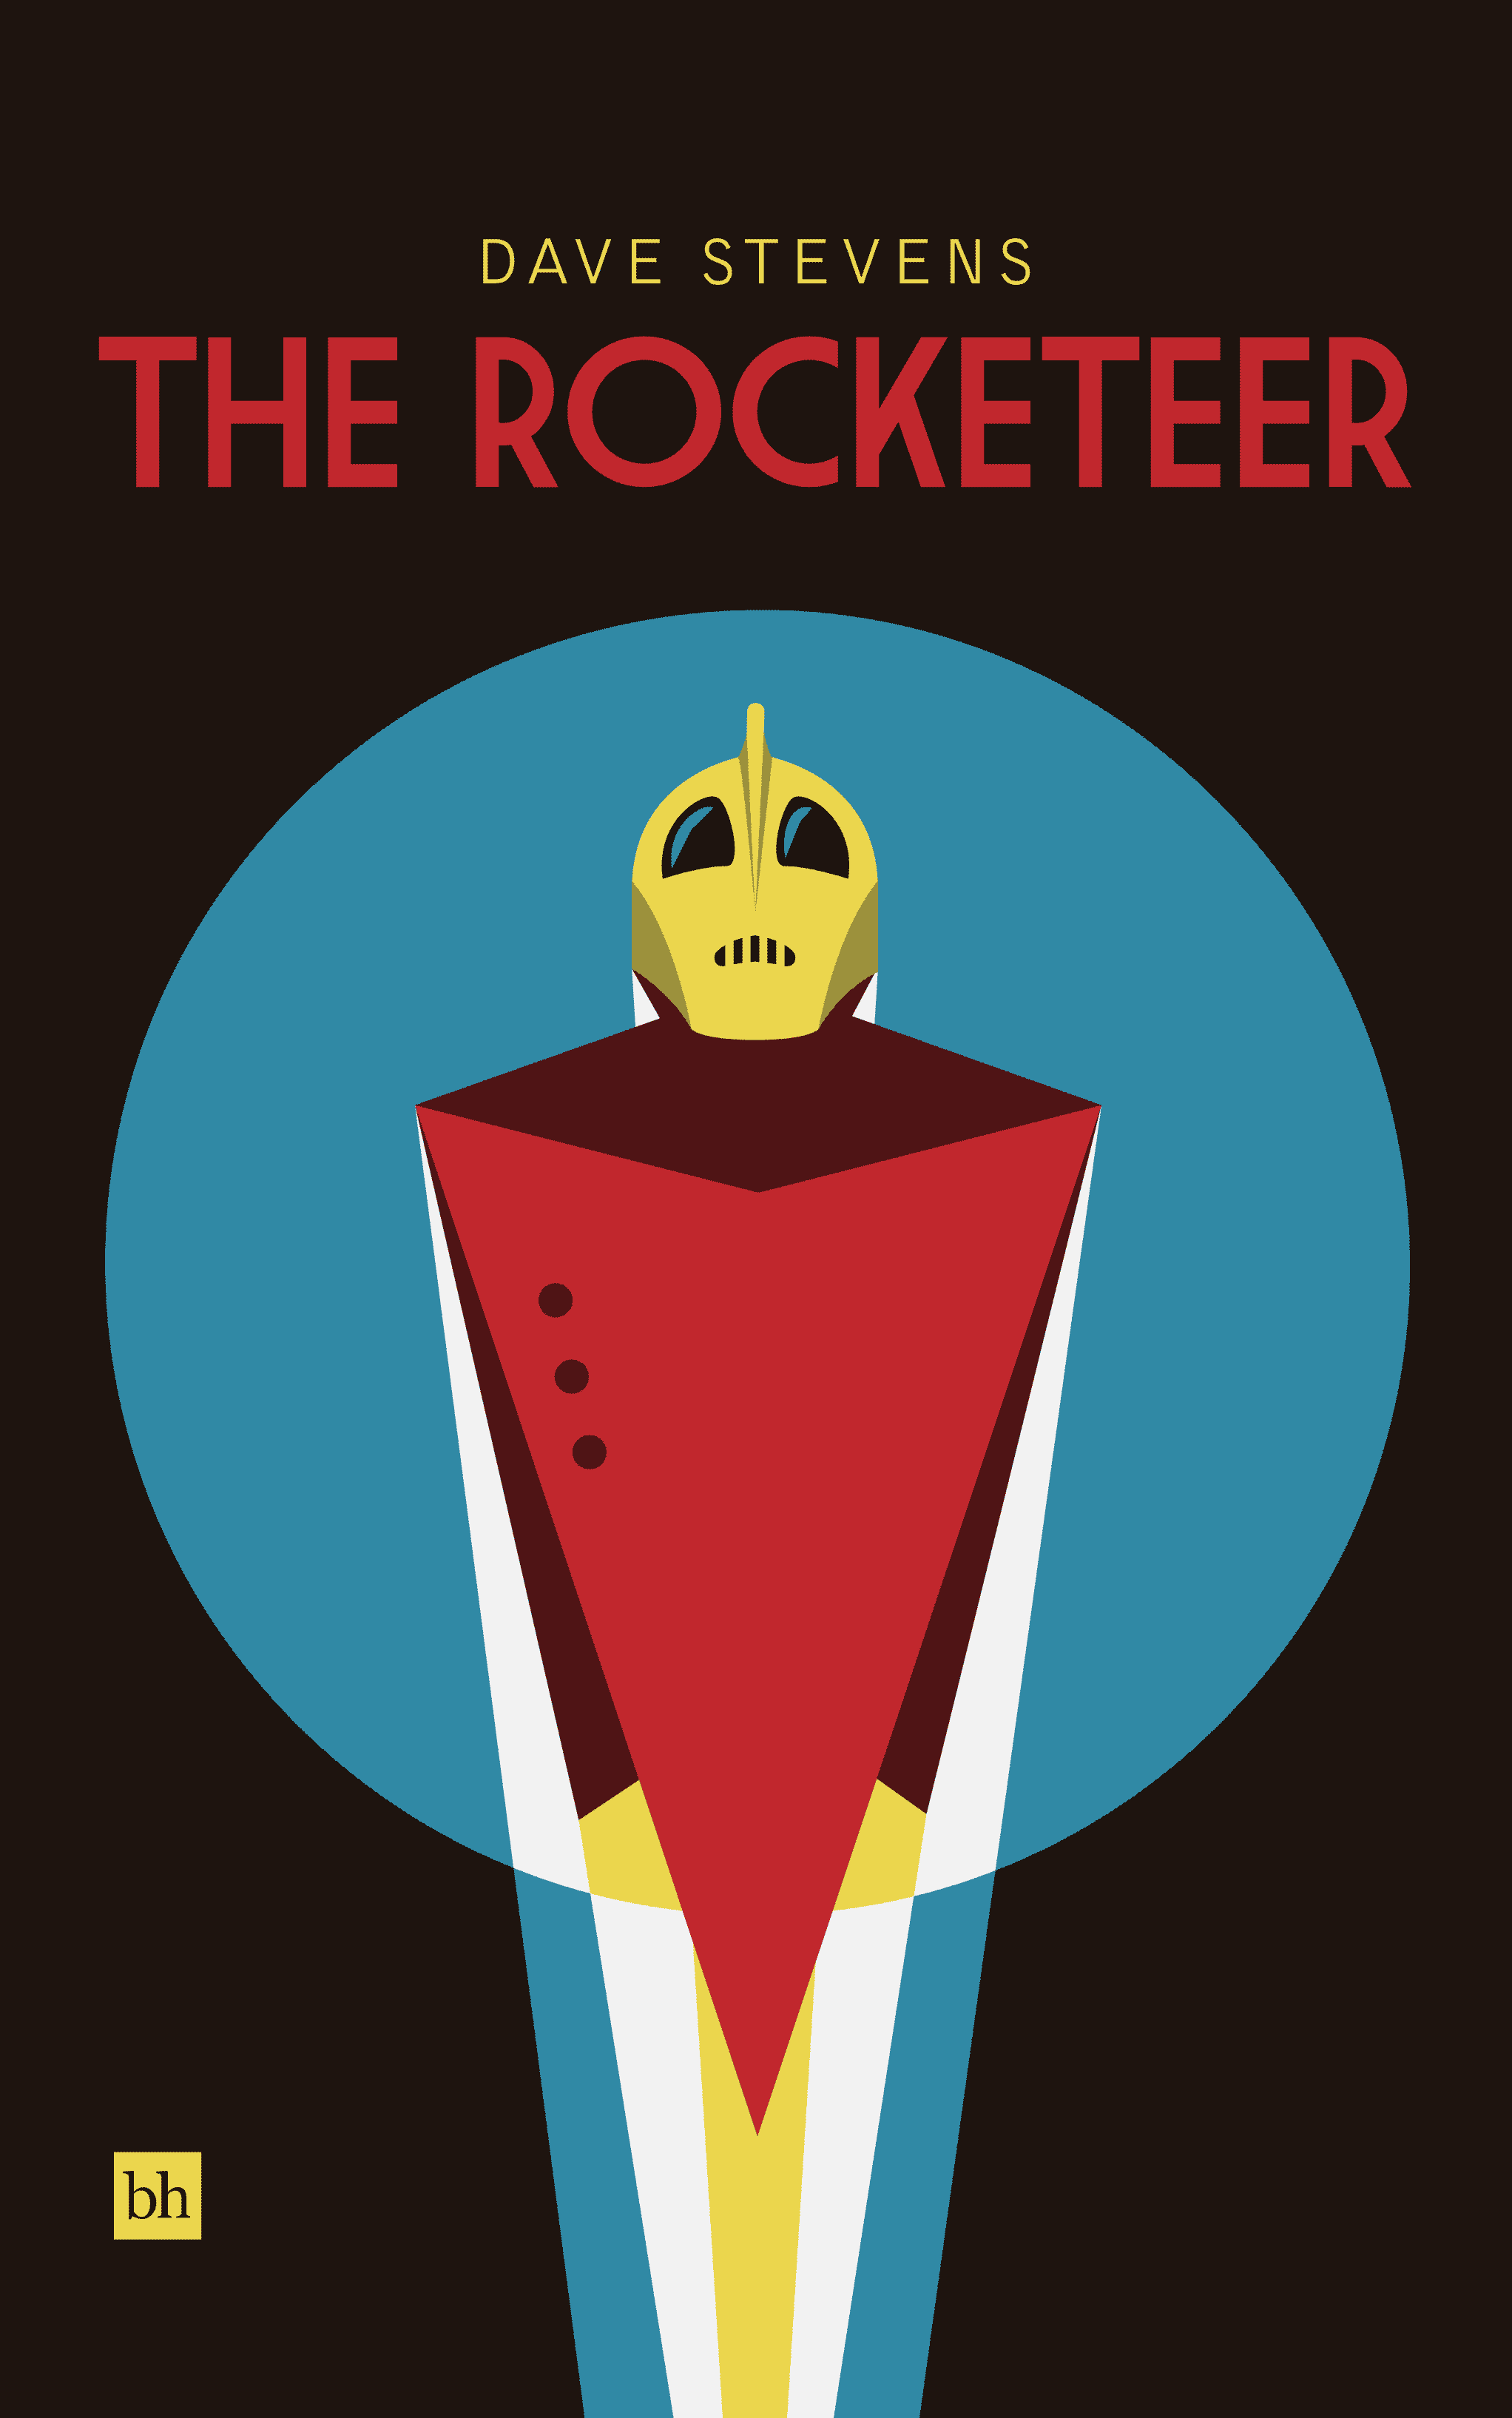 The Rocketeer by Dave Stevens